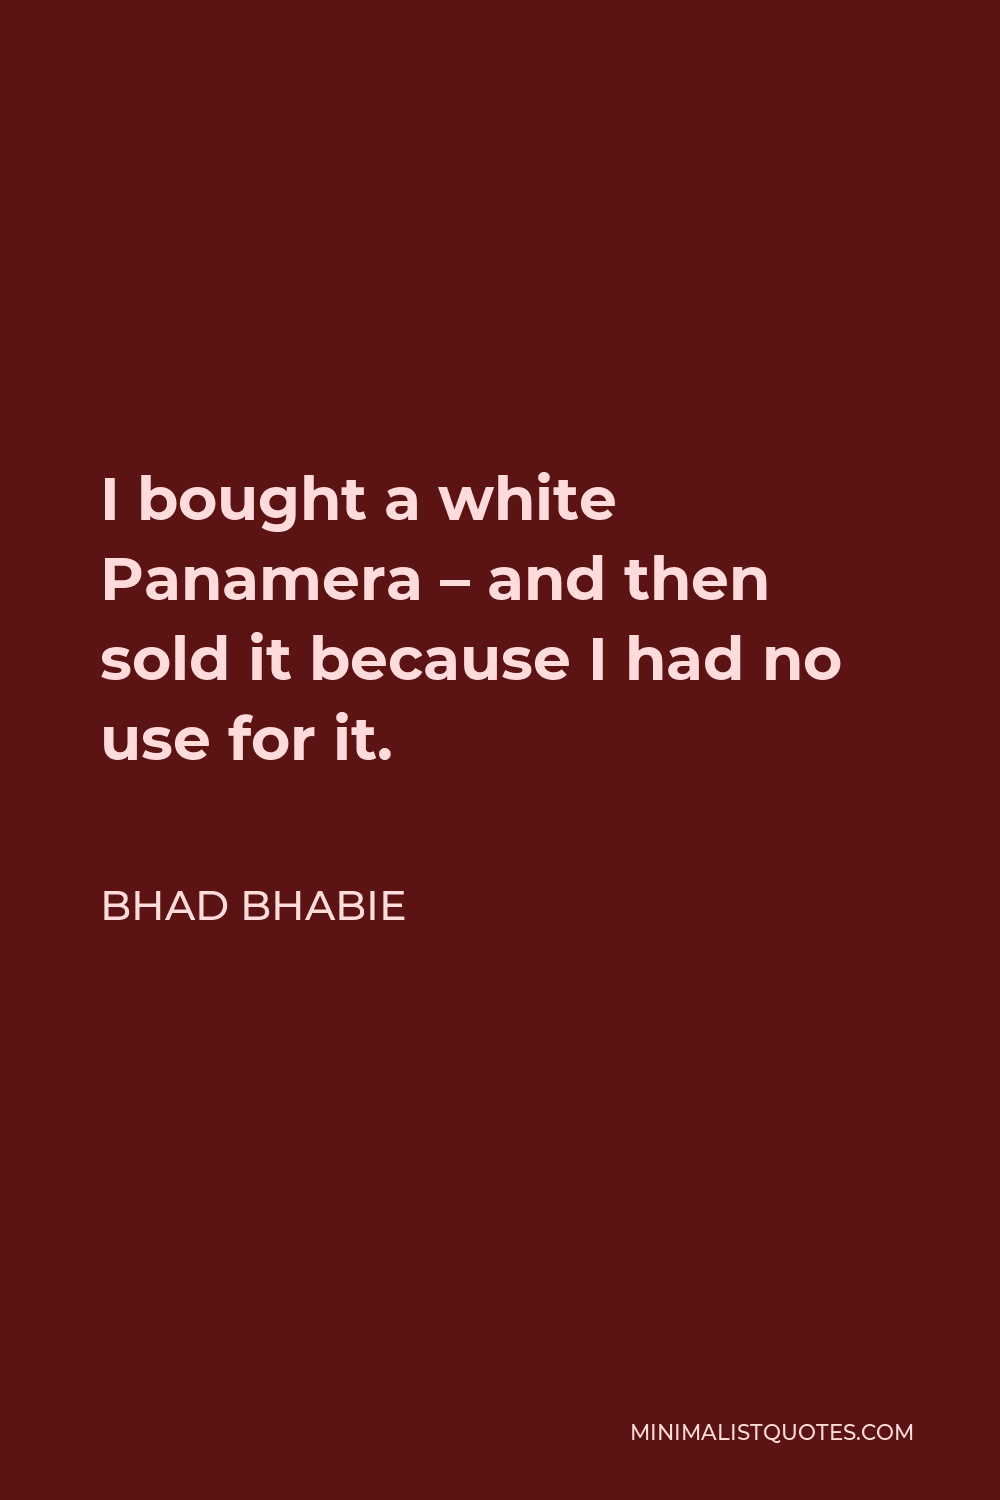 Bhad Bhabie Quote - I bought a white Panamera – and then sold it because I had no use for it.